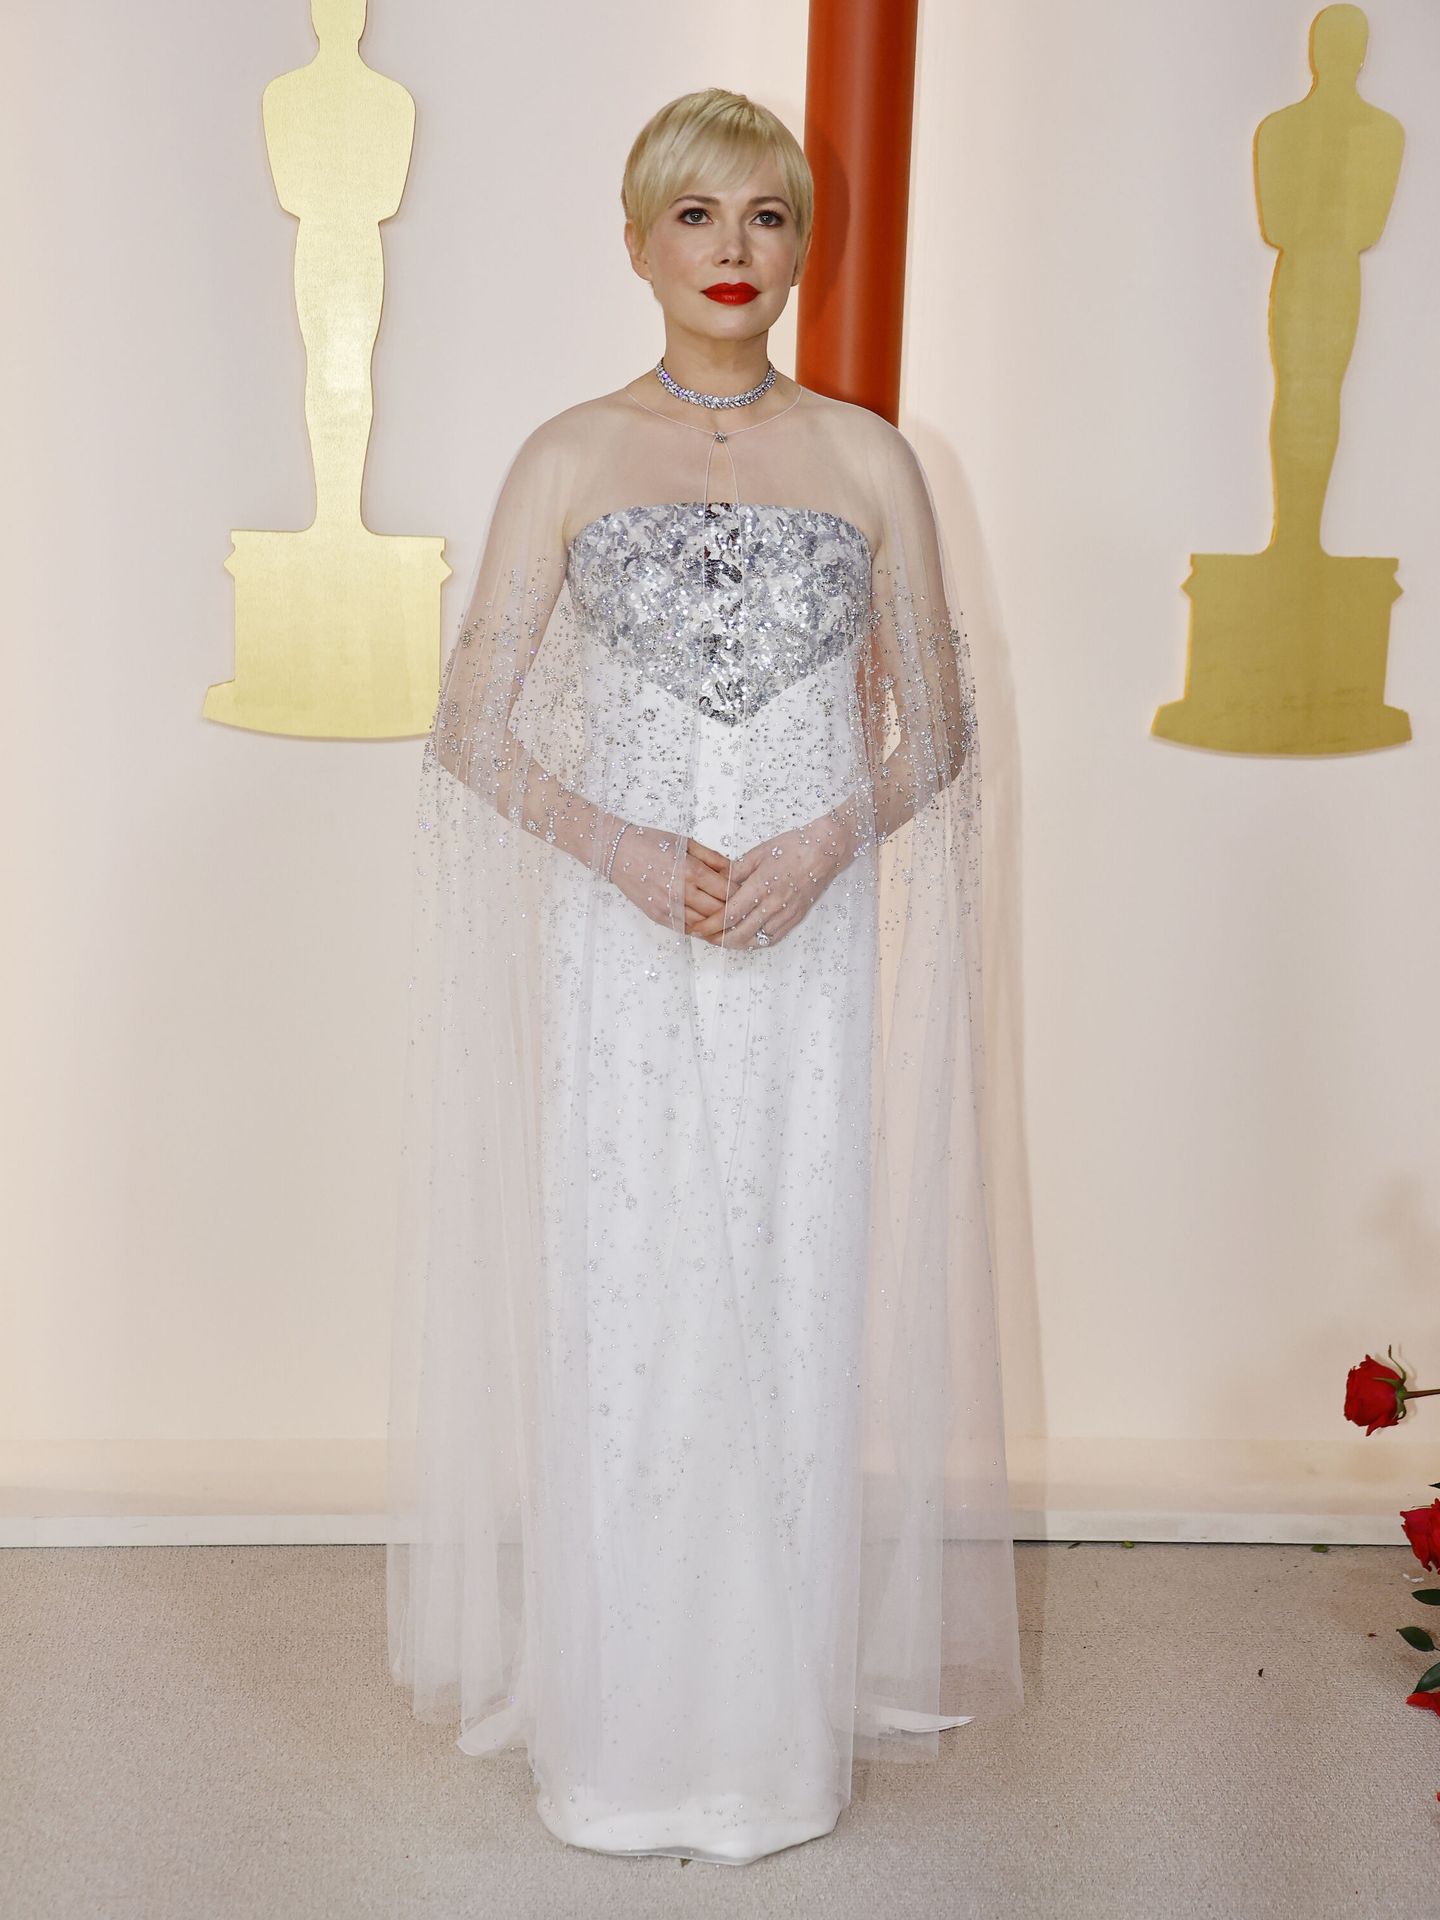 Michelle Williams poses on the champagne-colored red carpet during the Oscars arrivals at the 95th Academy Awards in Hollywood, Los Angeles, California, U.S., March 12, 2023. REUTERS Eric Gaillard